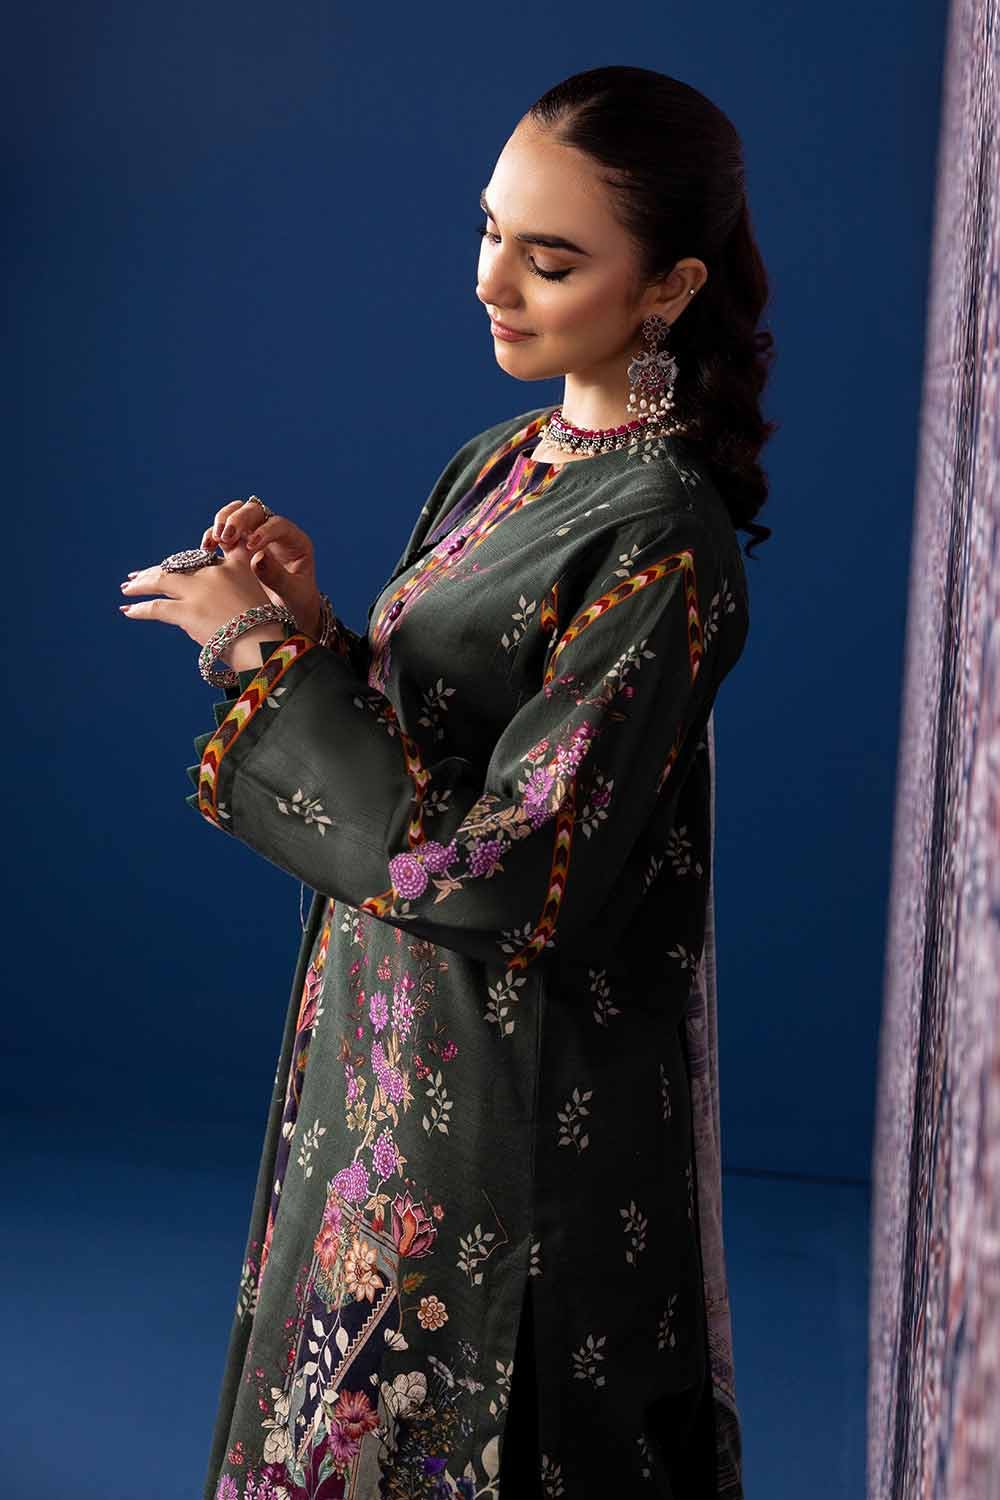 Gul Ahmed 3PC Khaddar Printed Unstitched Suit K-32012